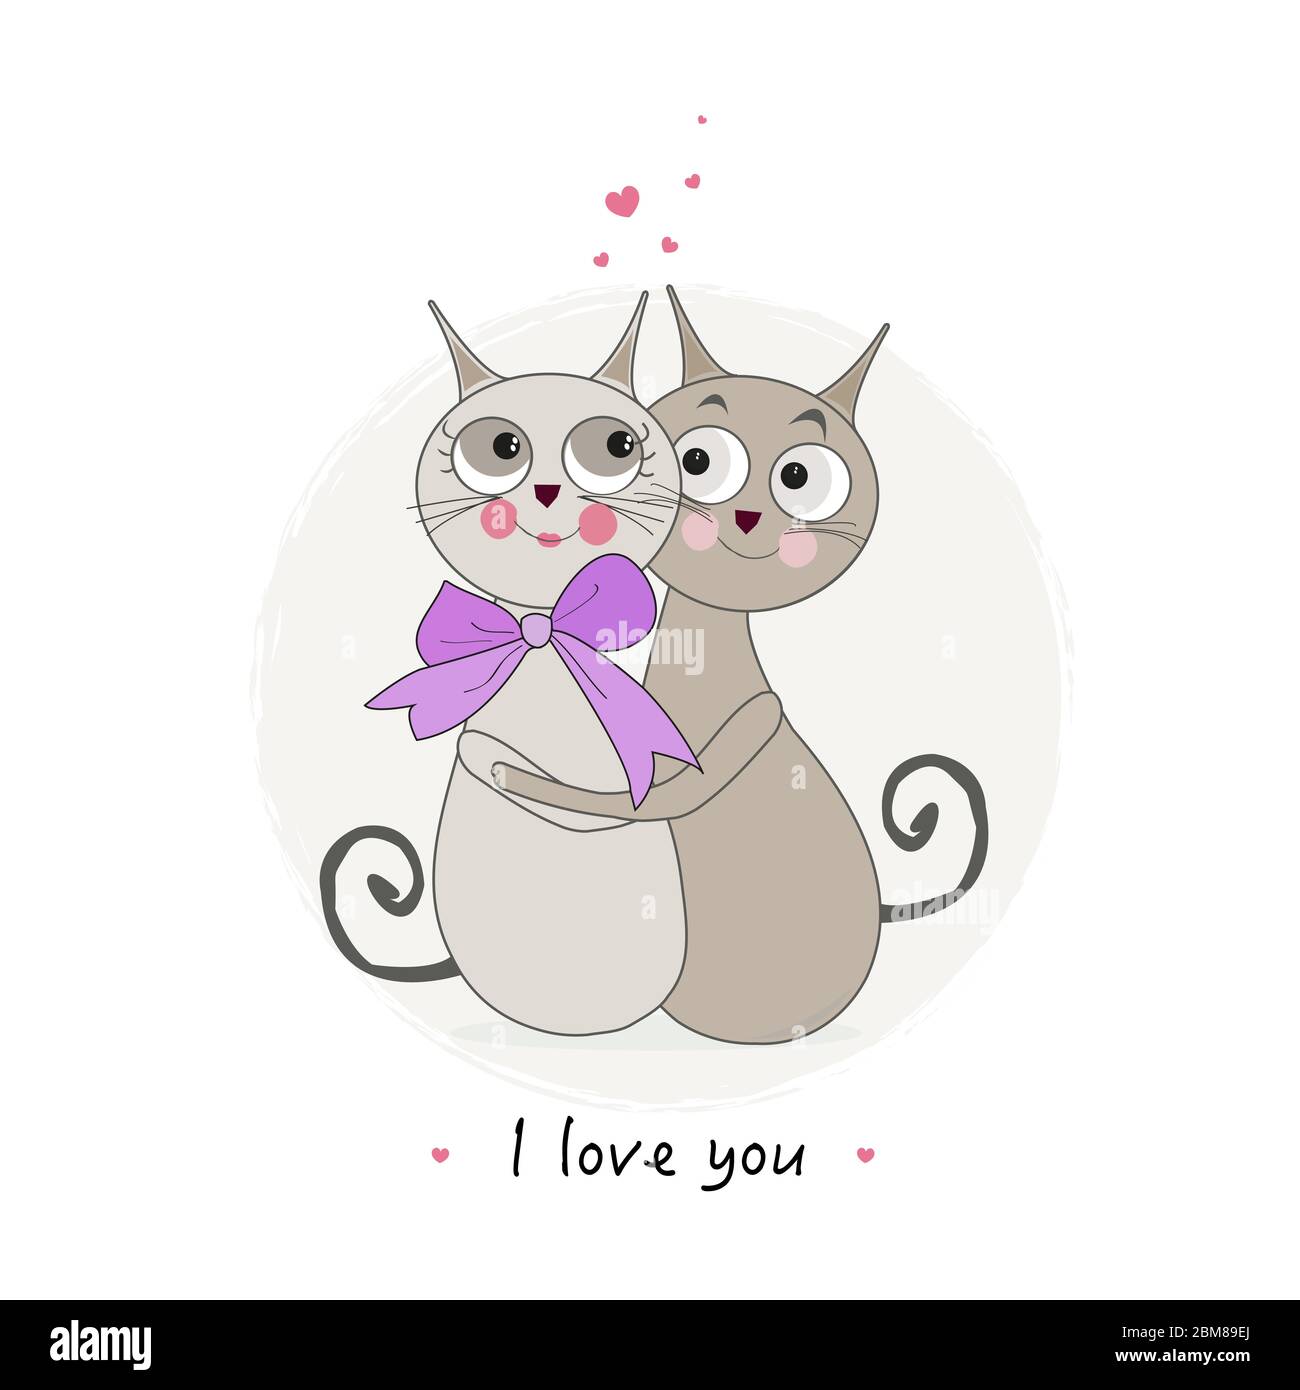 Two Cats in Love. Valentine Day Greeting Card. Vector Illustration